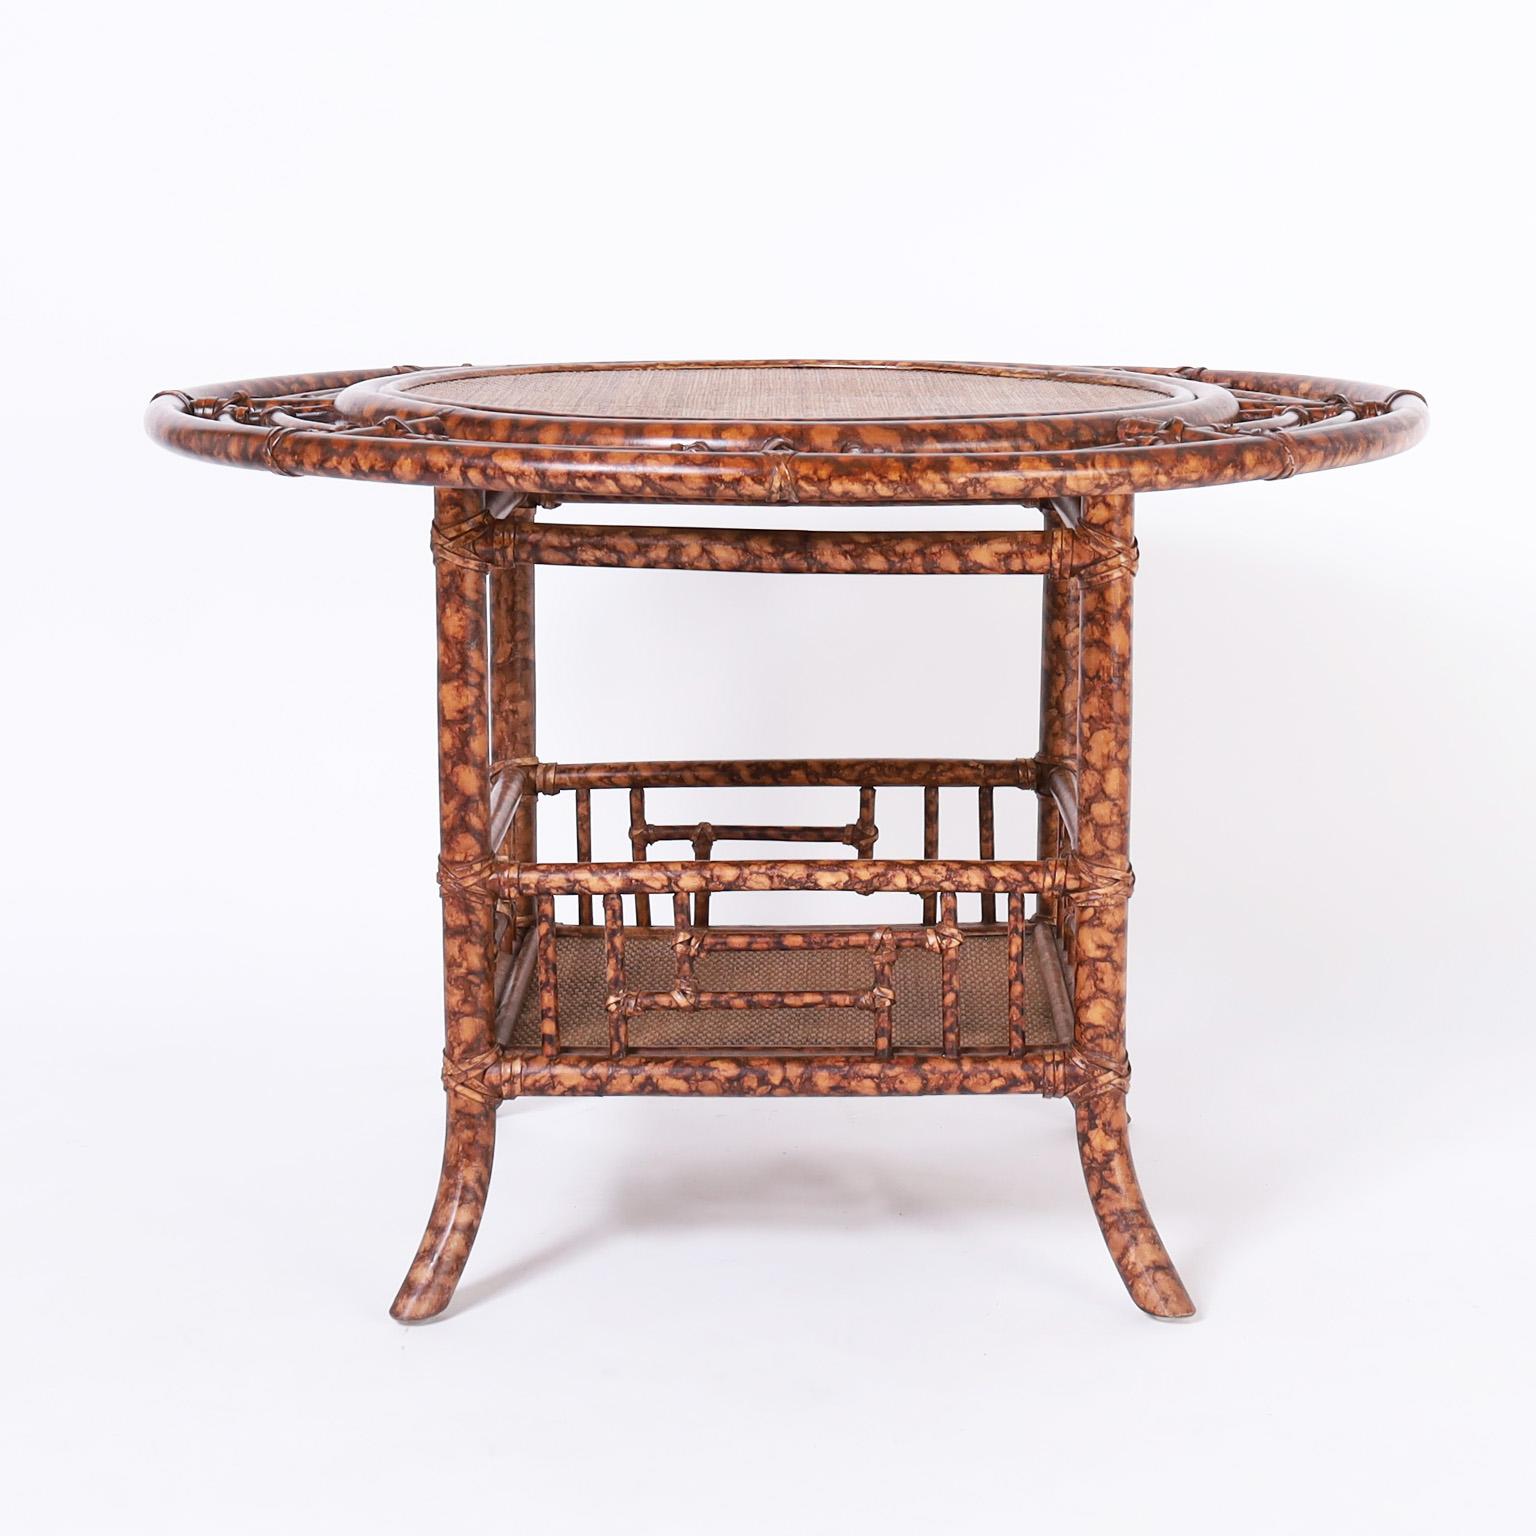 British colonial style coffee table crafted in faux bamboo with a faux tortoise finish having a round top with a grasscloth panel in the middle. The base has a lower tier and splayed legs.